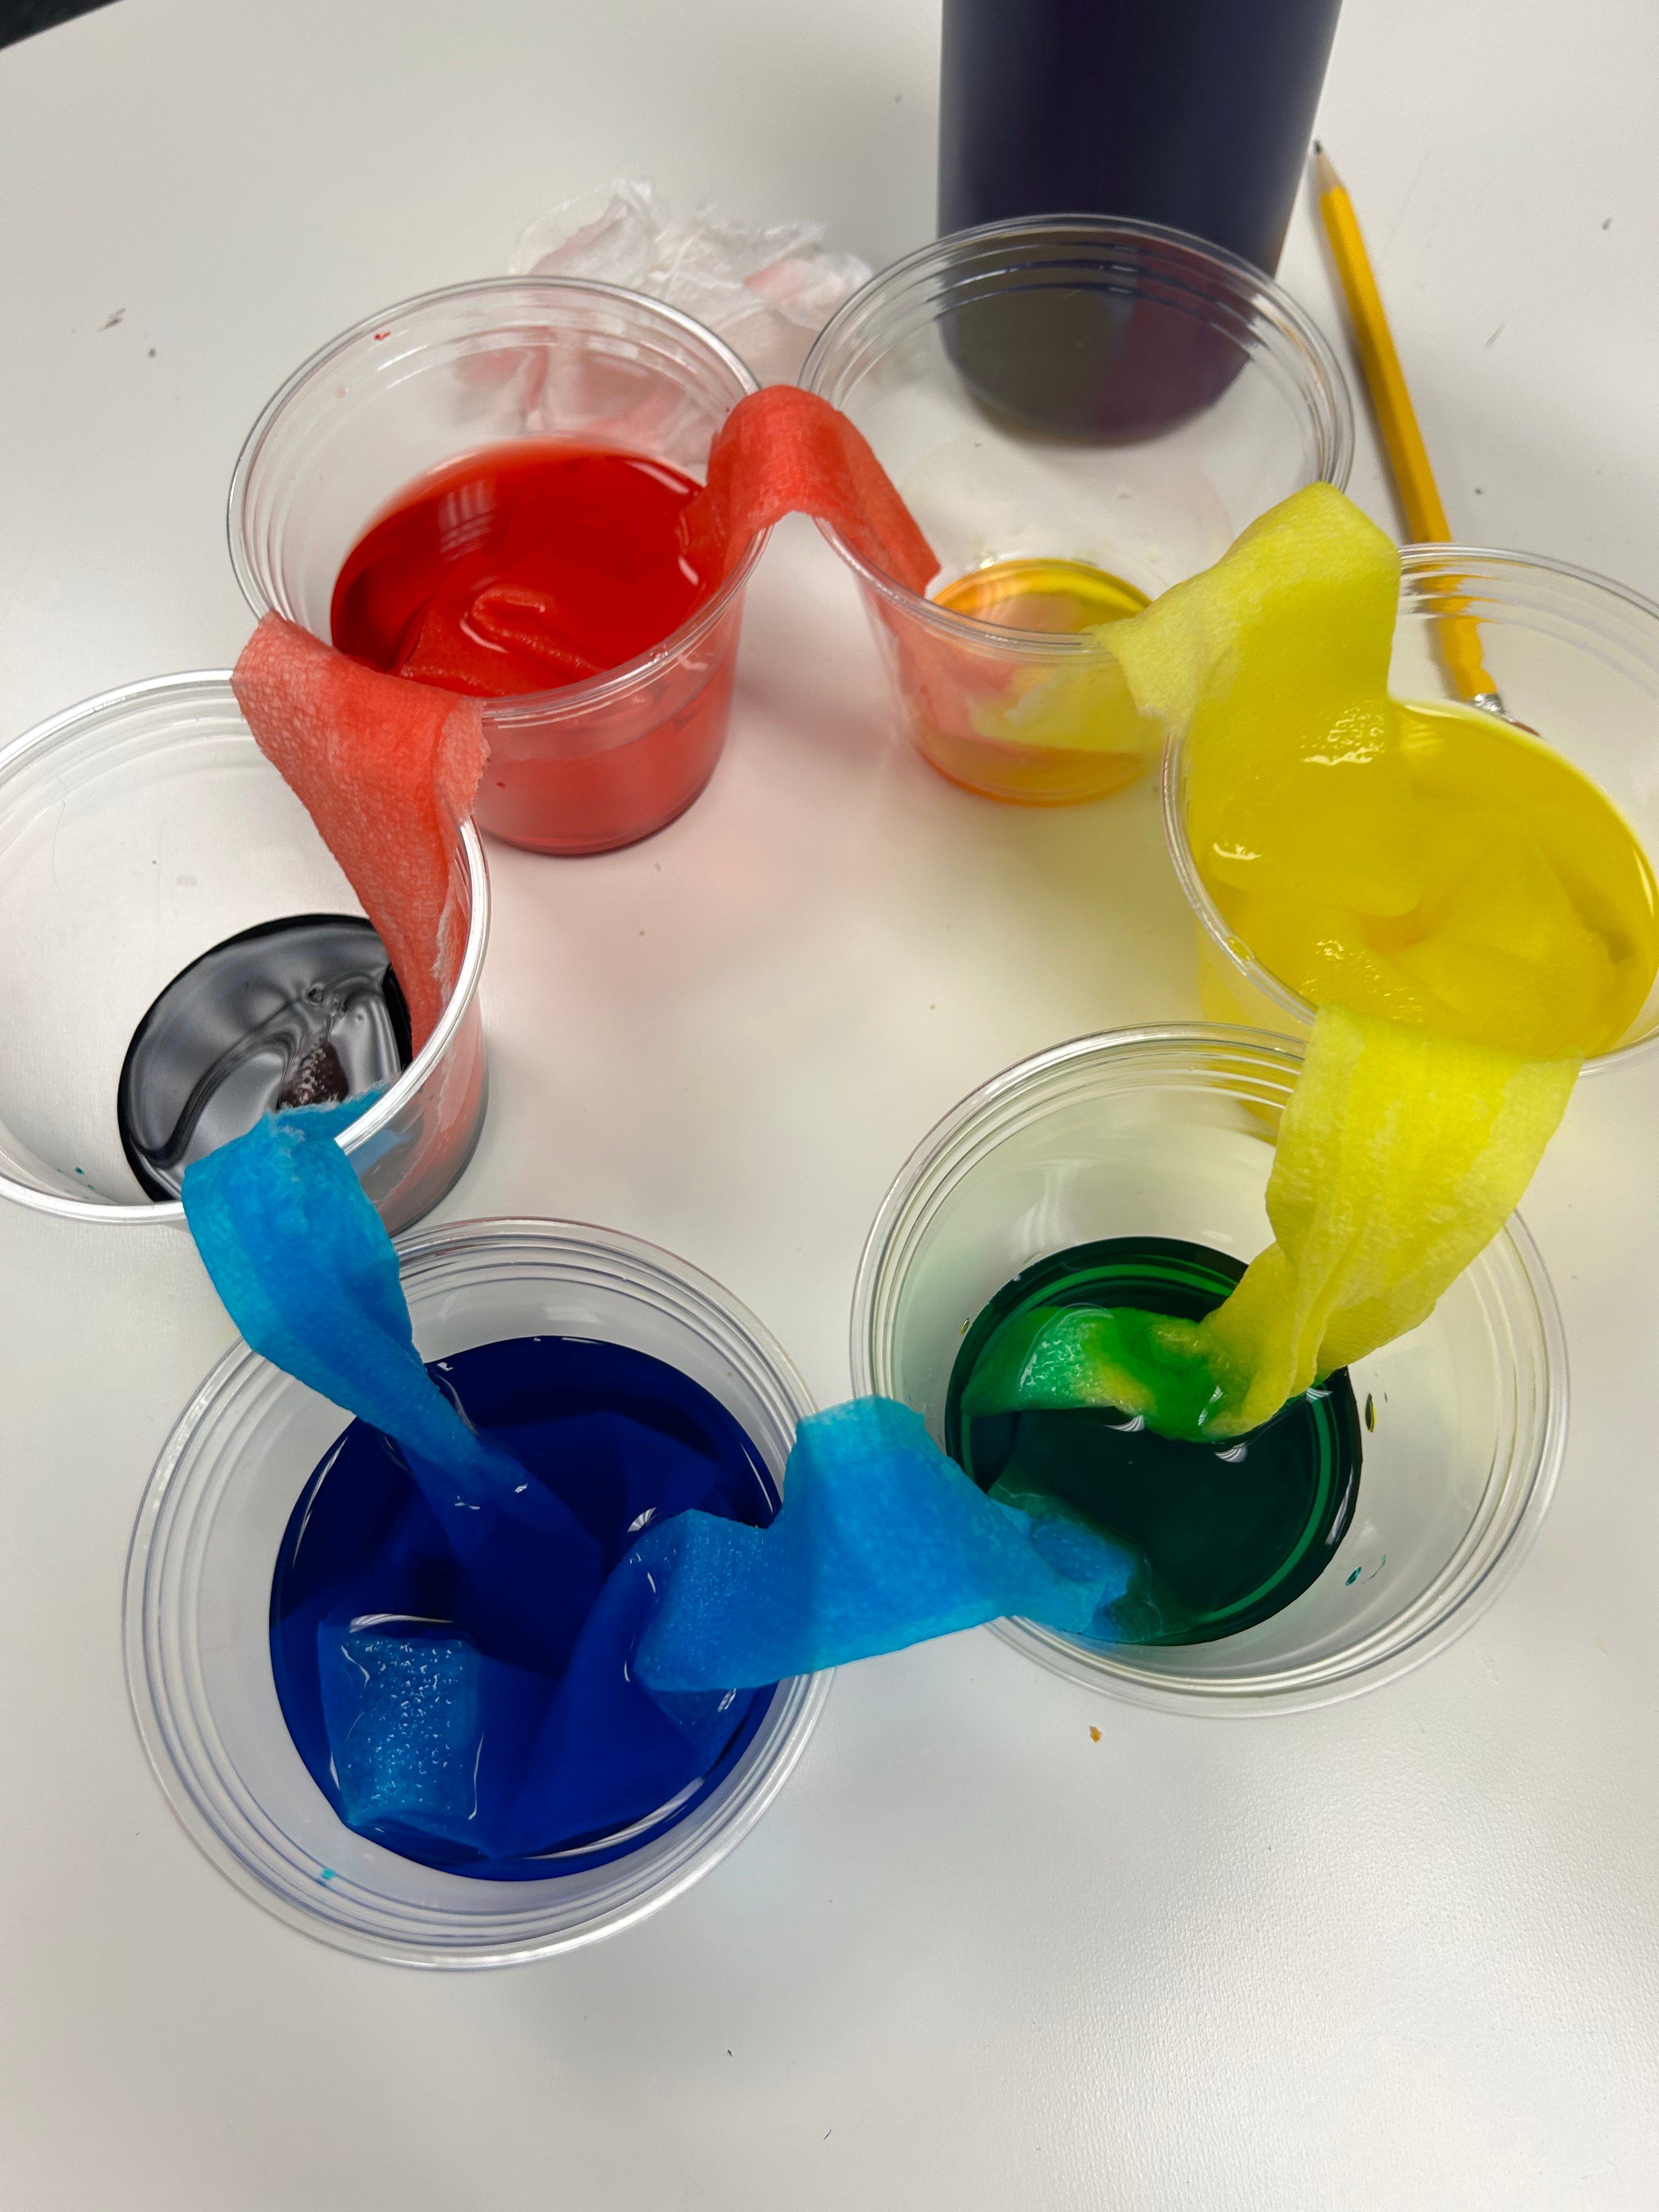 An experiment from Kids in Science consisting of cups of different colors of liquid and a cloth connecting them